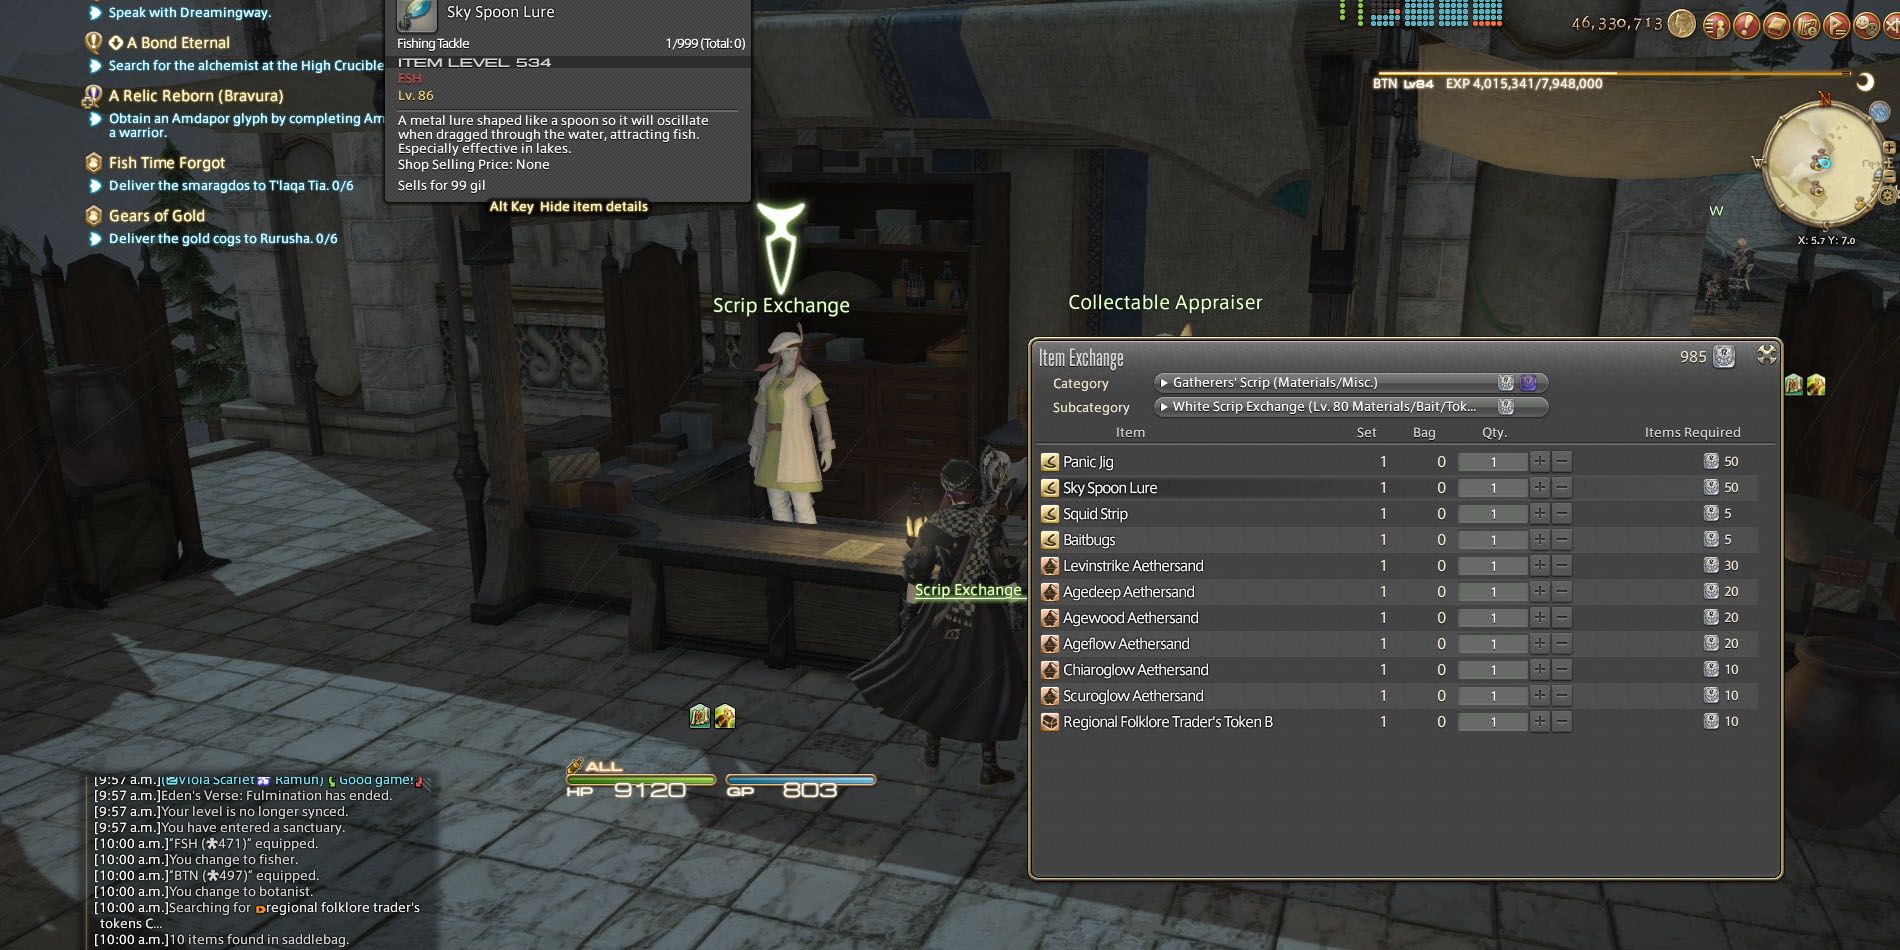 Buying items with White Scrips of Final Fantasy 14